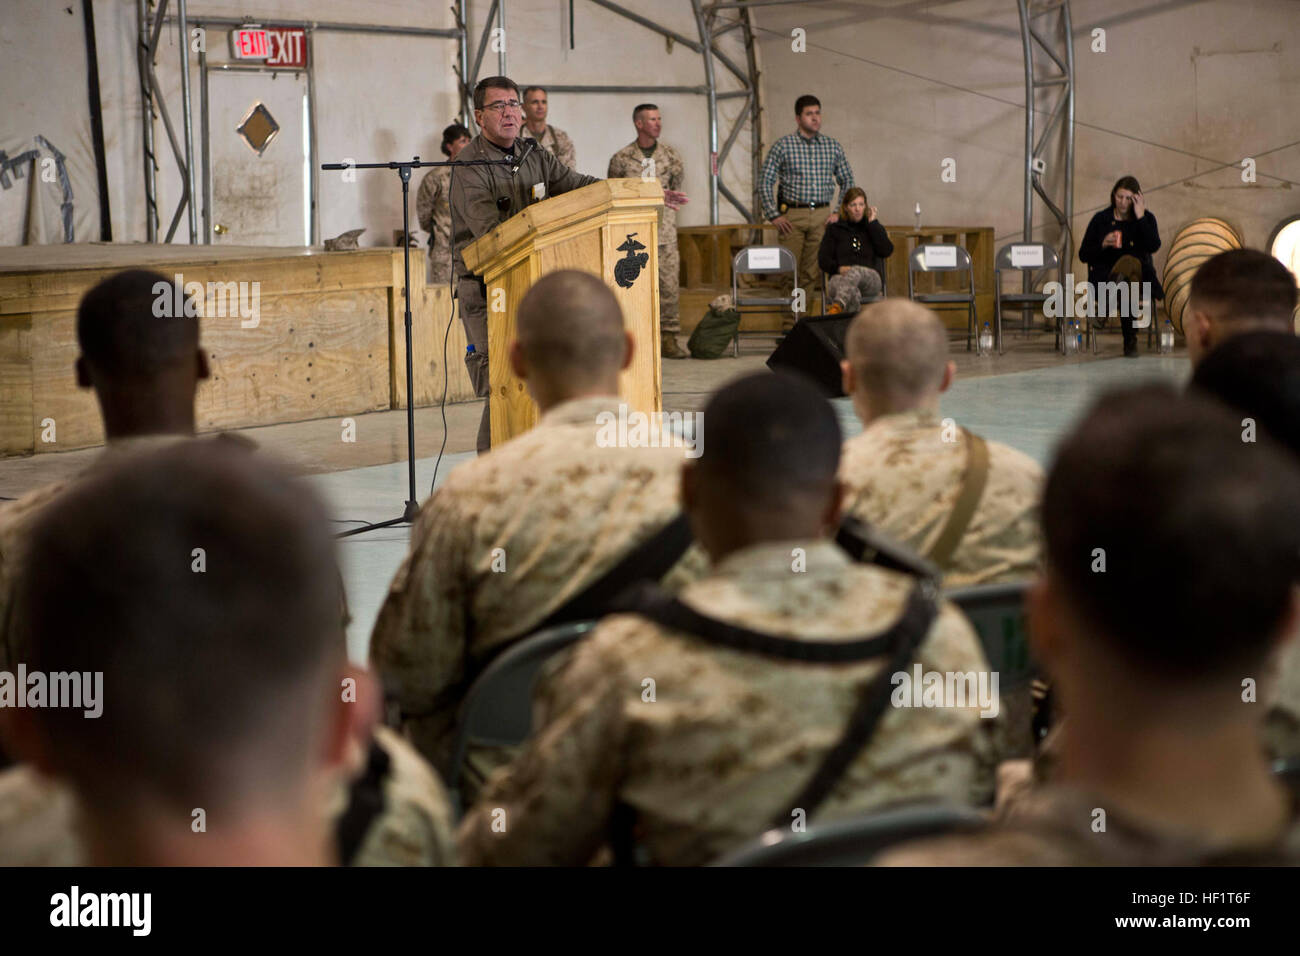 U.S. Deputy Secretary of Defense Ashton Carter, speaks to service members with Regional Command (Southwest) at Camp Leatherneck, Helmand province, Afghanistan, Nov. 29, 2013. Carter came to speak to military leaders and coaltion forces with RC(SW). (Official Marine Corps Photo by Cpl. Nicholas T. Nohalty/Released) U.S. Deputy Secretary of Defense Ash Carter, at lectern, speaks to Service members with Regional Command Southwest at Camp Leatherneck, Helmand province, Afghanistan, Nov. 29, 2013 131129-M-FN127-015 Stock Photo